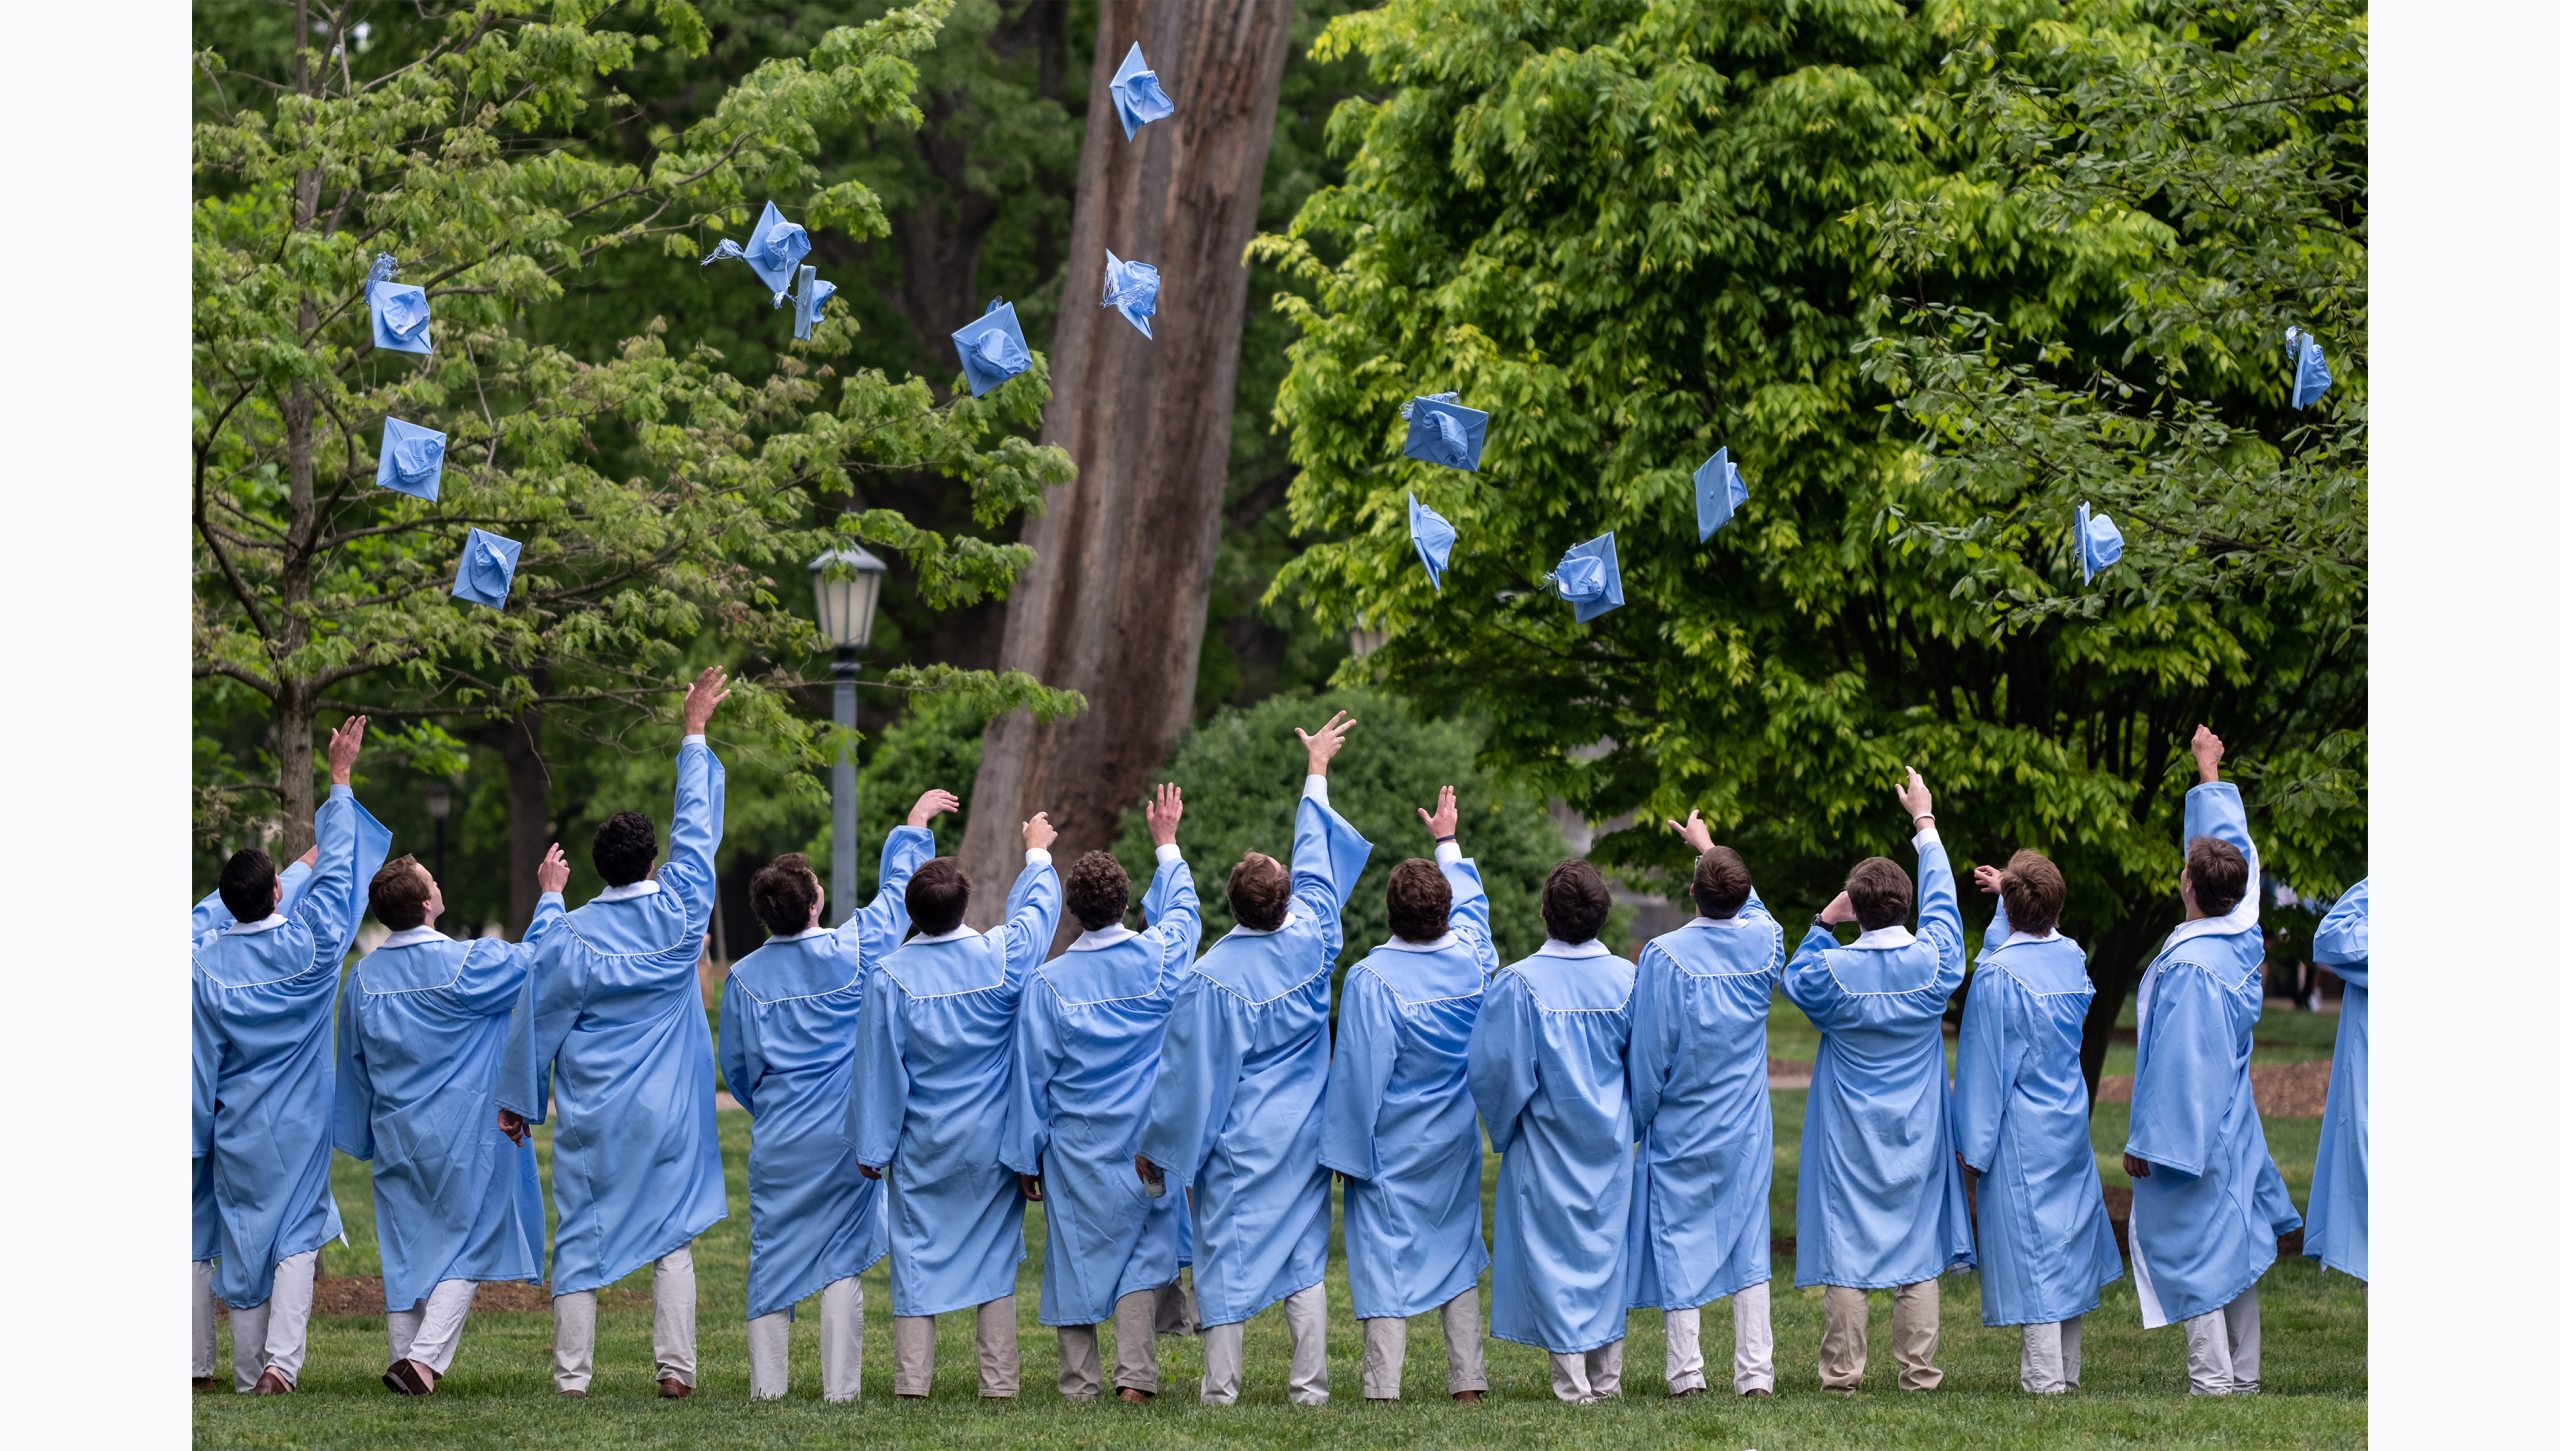 A group of students in regalia throwing caps up in their air for their group graduation photo.